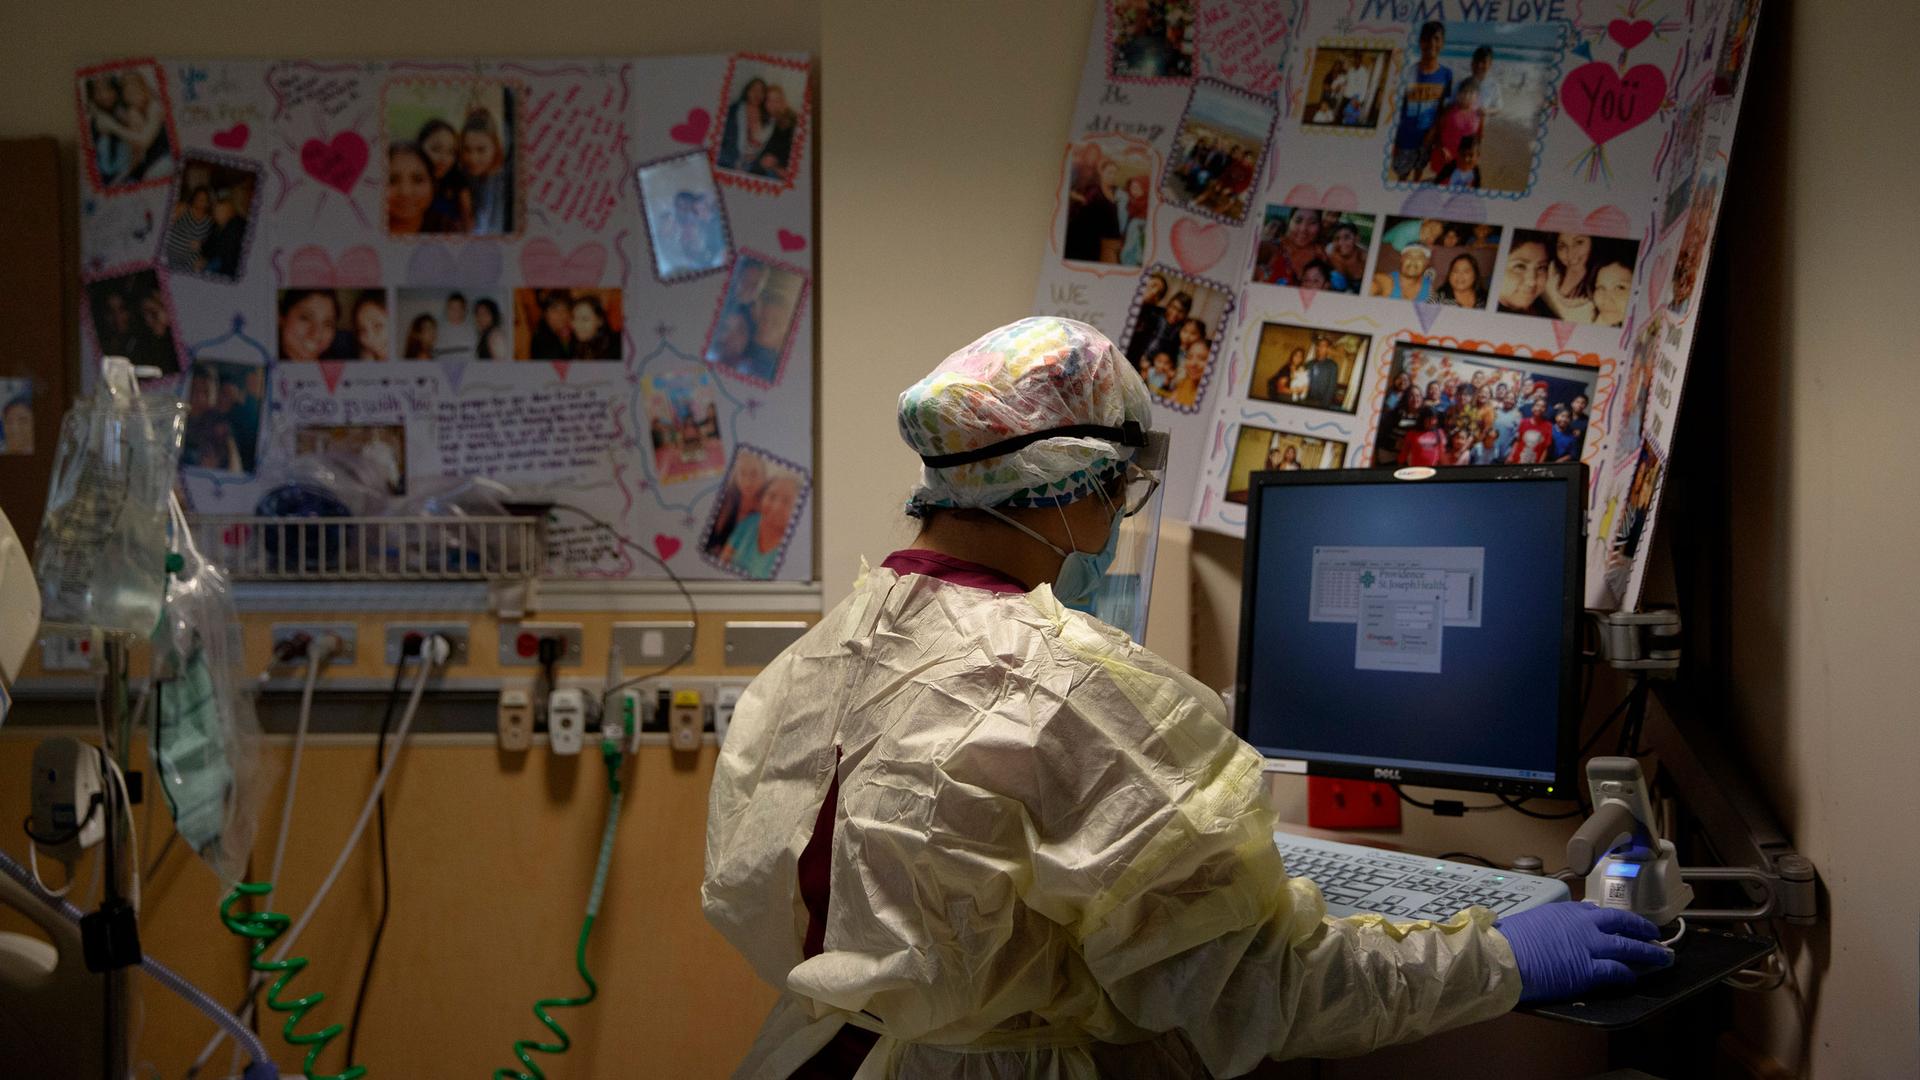 A woman is shown from behind, working on a computer and wearing a nursing cap and gown with get well soon cards on the wall.